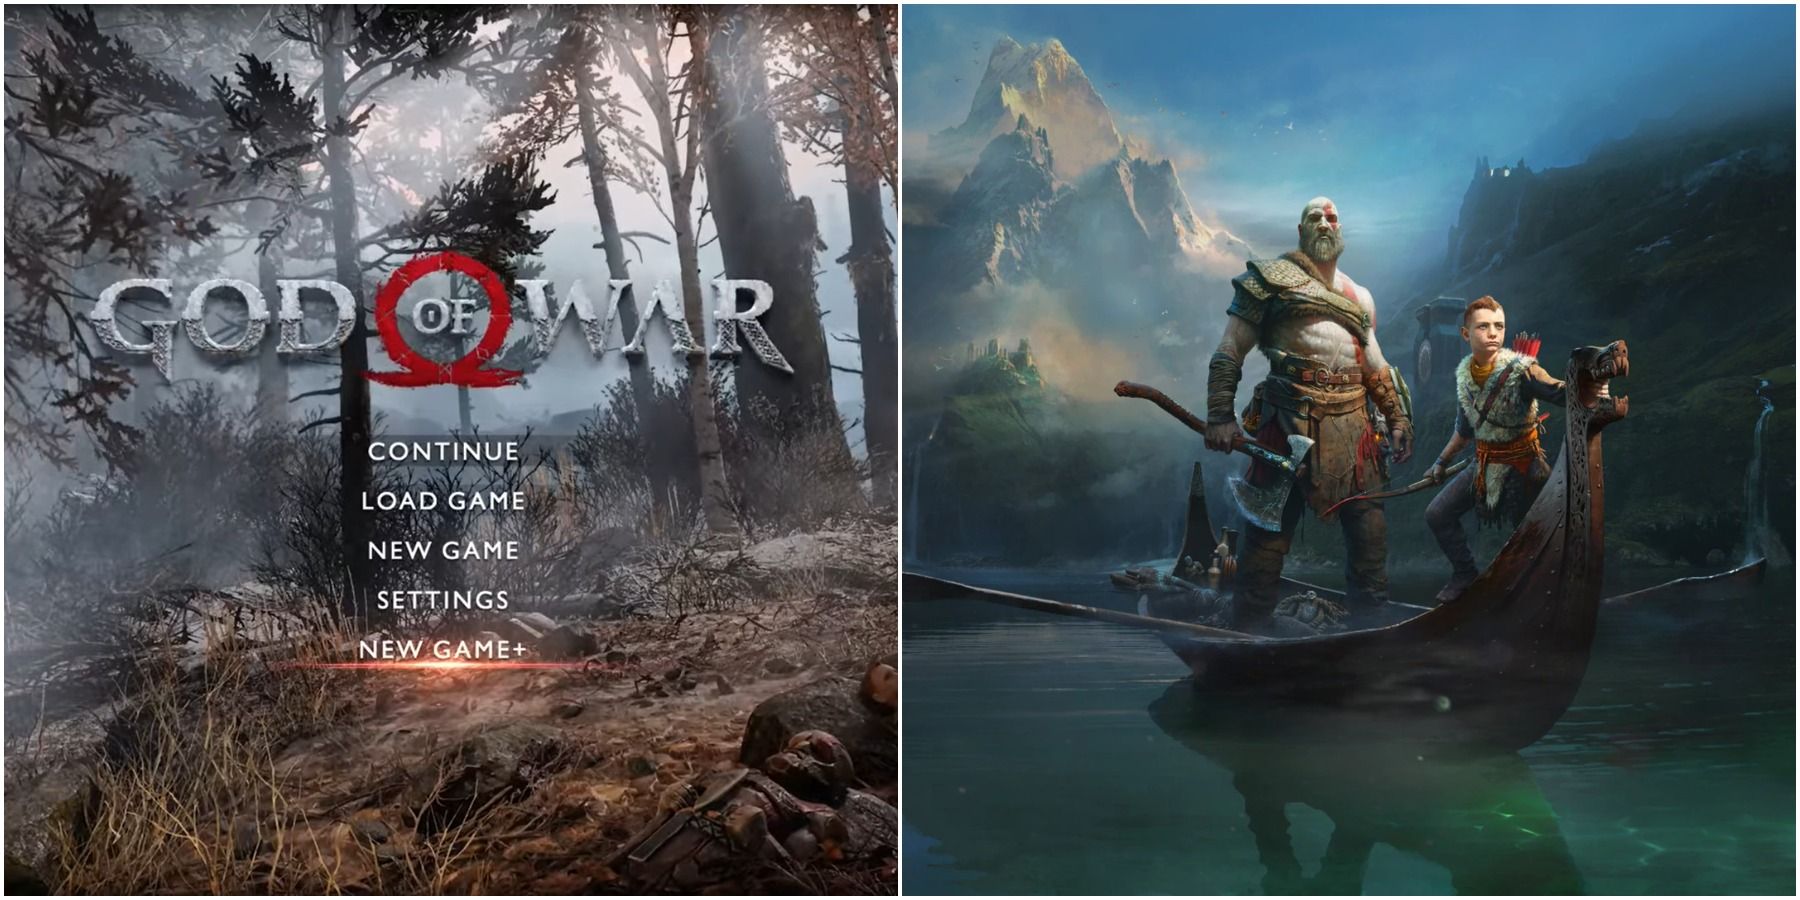 (Left) New Game+ option in the main menu (Right) God of War cover art with Kratos and Atreus on a boat